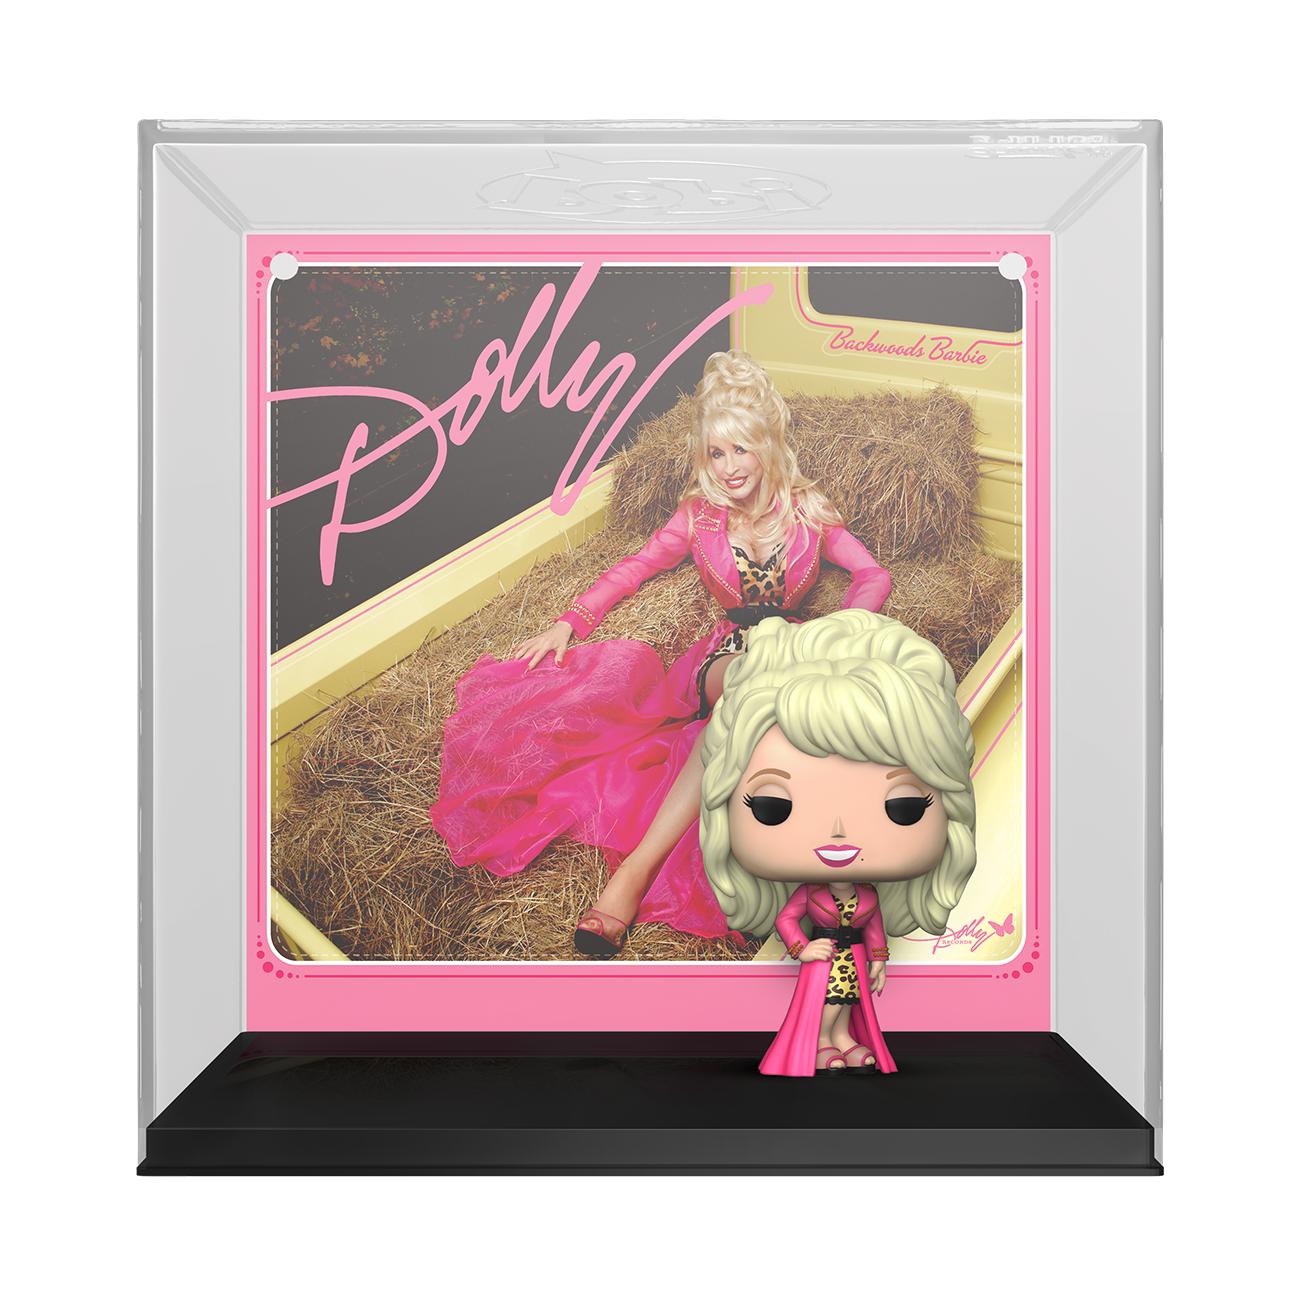 Funko Pop Dolly Parton dolls celebrate Hall of Fame performer